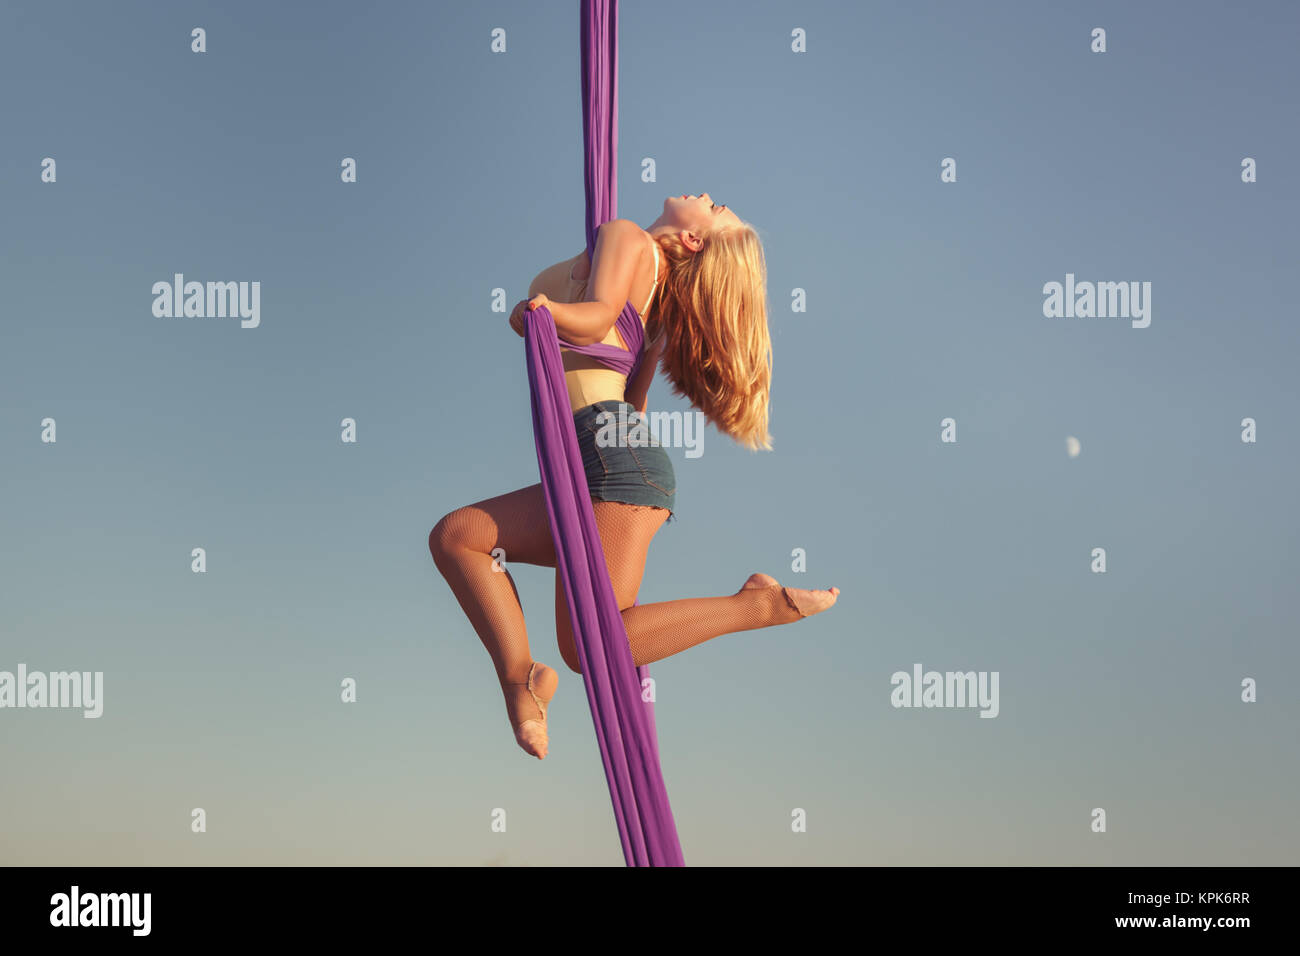 Air acrobat hangs on ropes high against the sky. Stock Photo